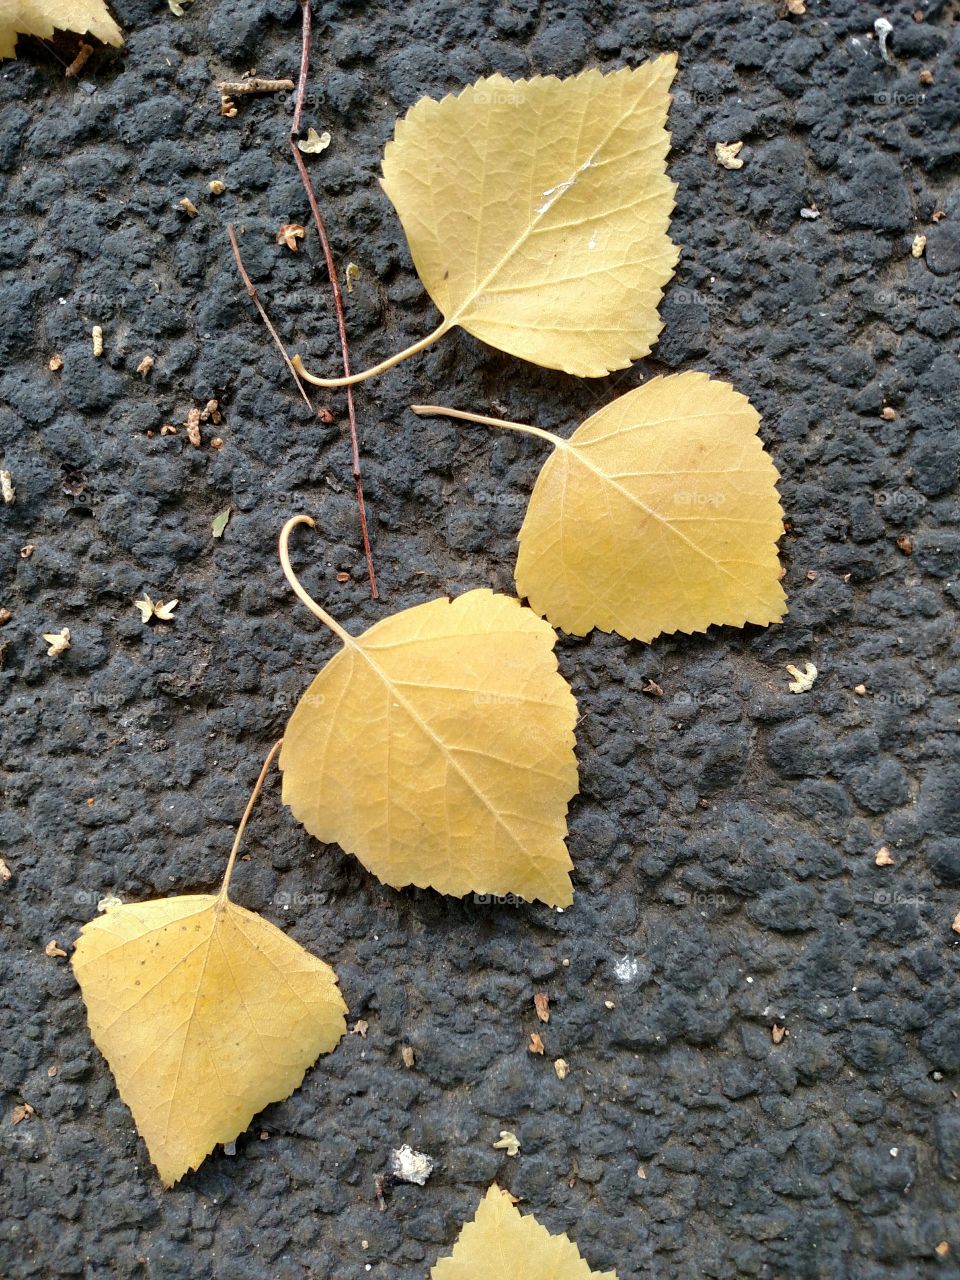 Autumn is coming. Yellow leaves Fall on the ground